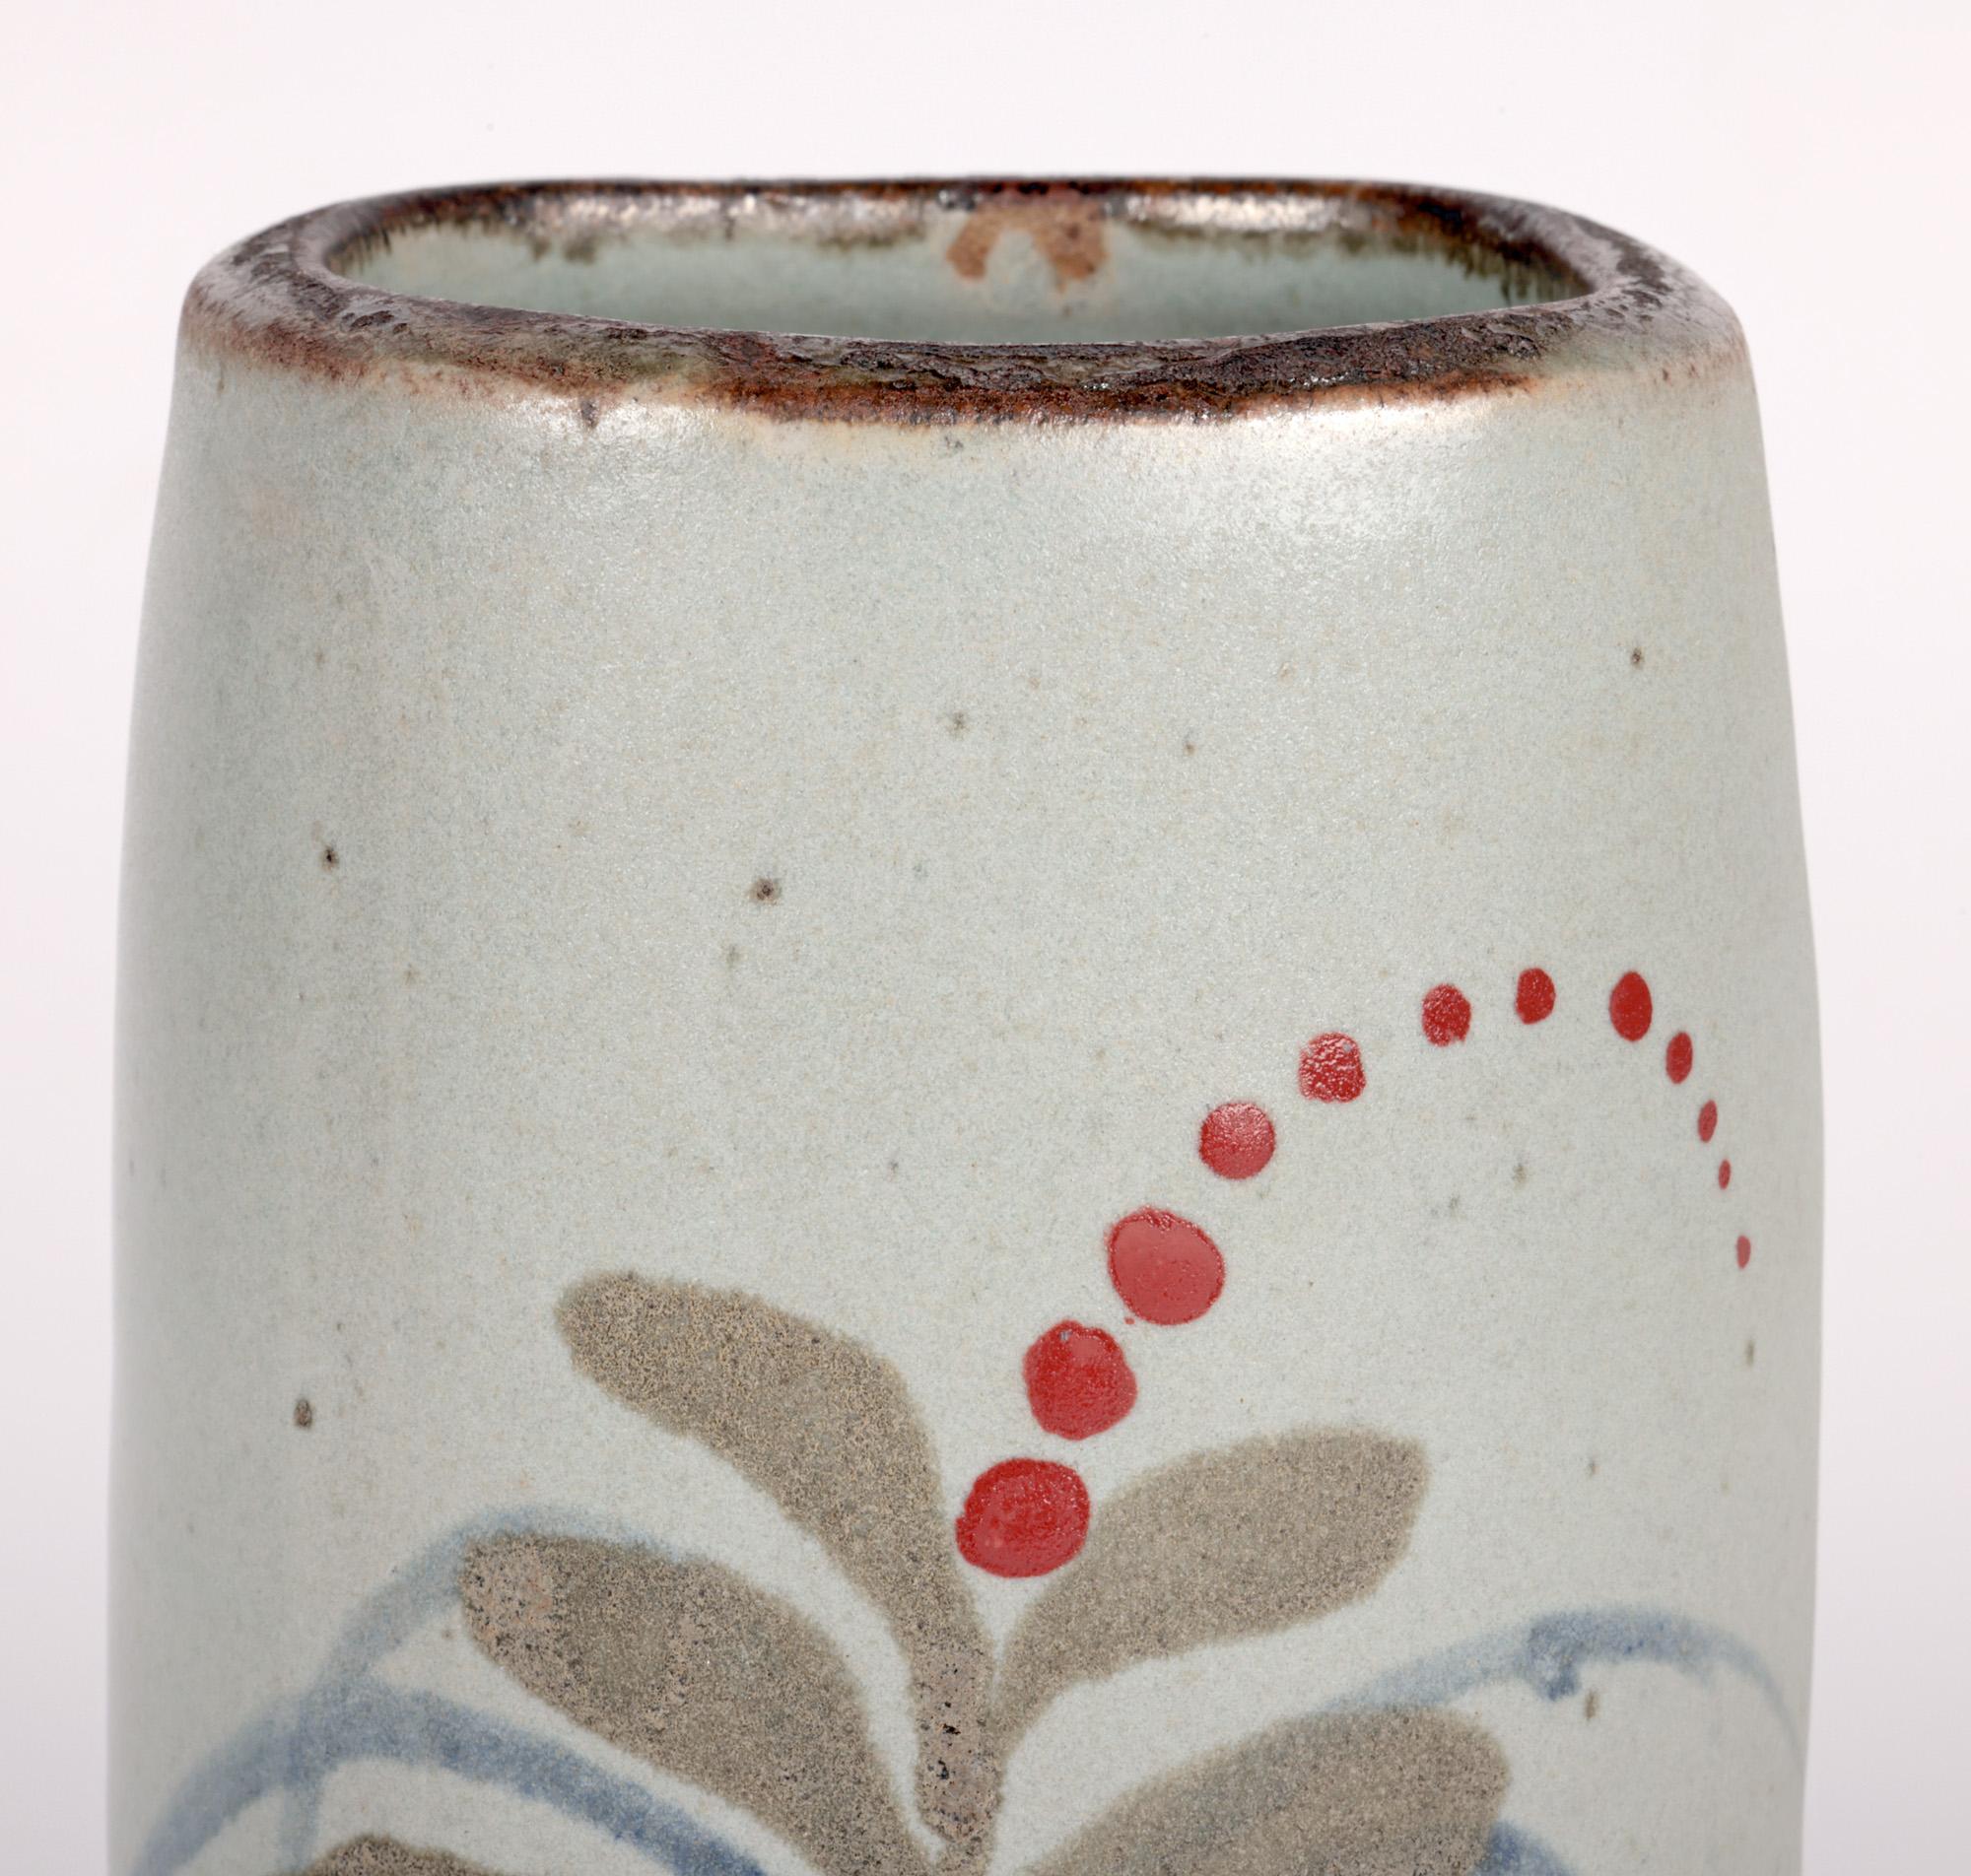 A very stylish Lowerdown Pottery stoneware studio pottery vase decorated in the foxglove pattern by renowned potter David Leach (British, 1911-2005) dating from around 1965. The heavily hand thrown vase stands on a flat unglazed rounded base with